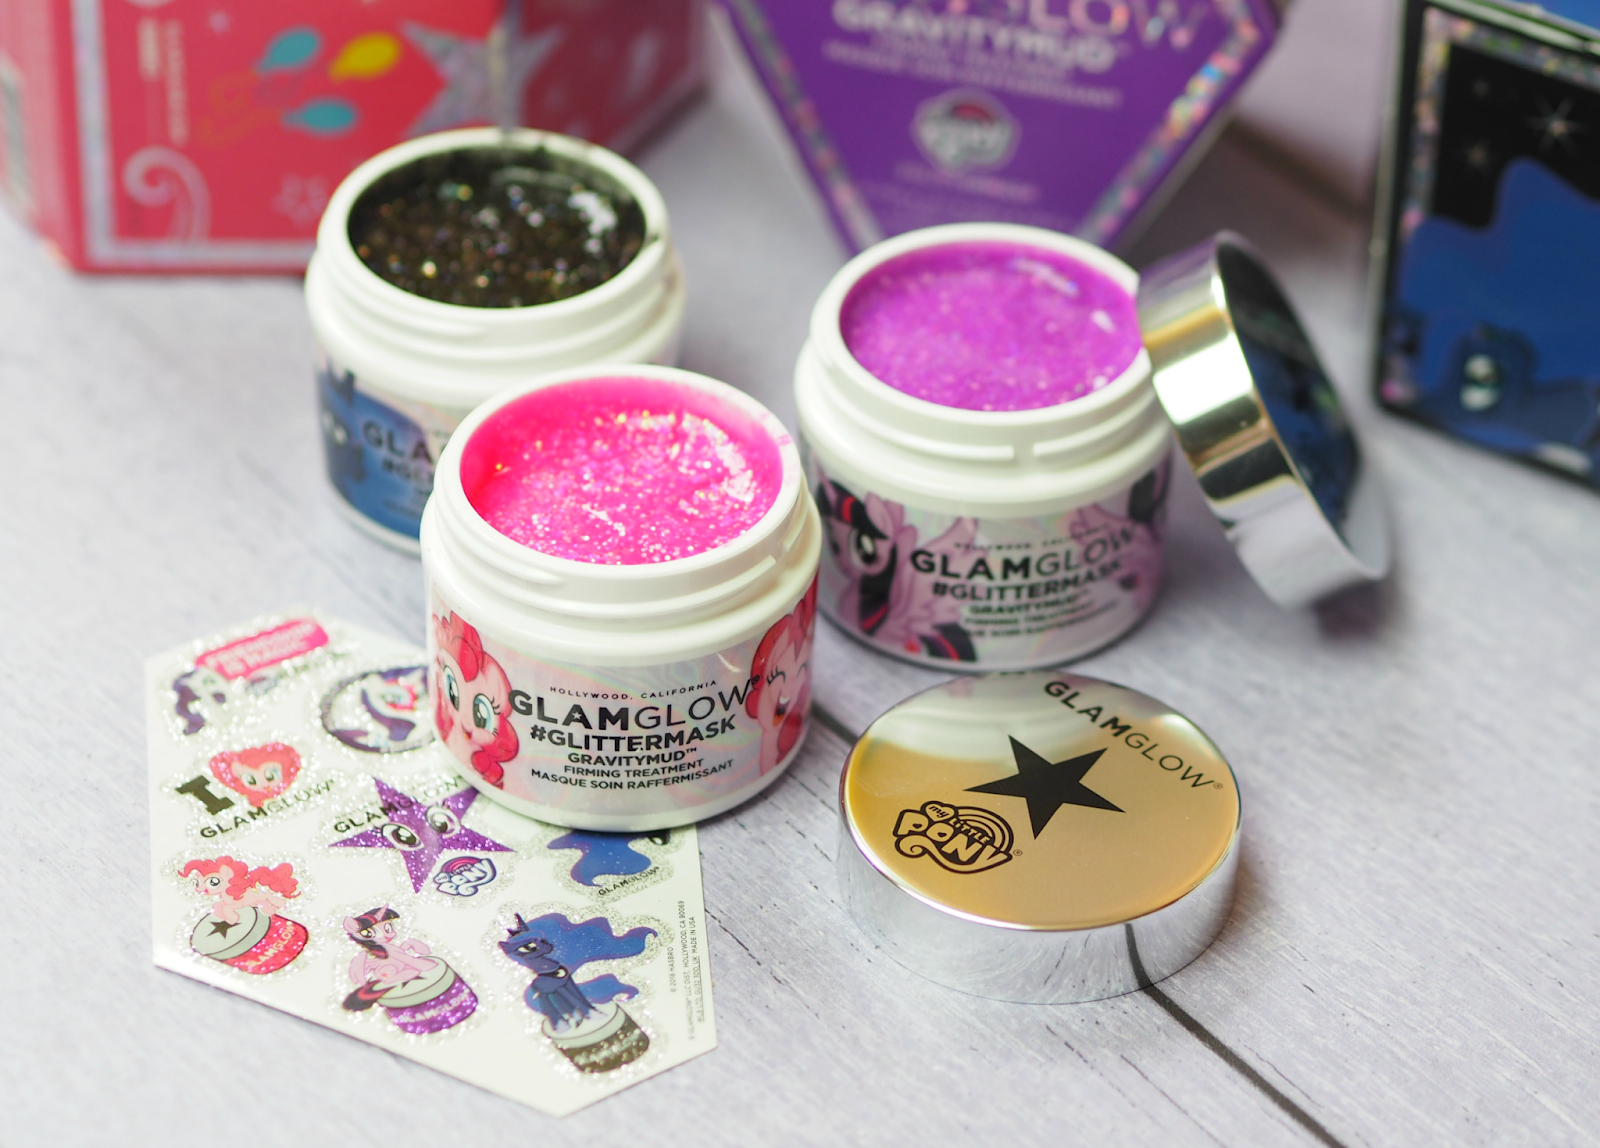 Are We Becoming Beauty Snobs" (Plus GlamGlow's NEW 'My Little Pony' Face Masks)